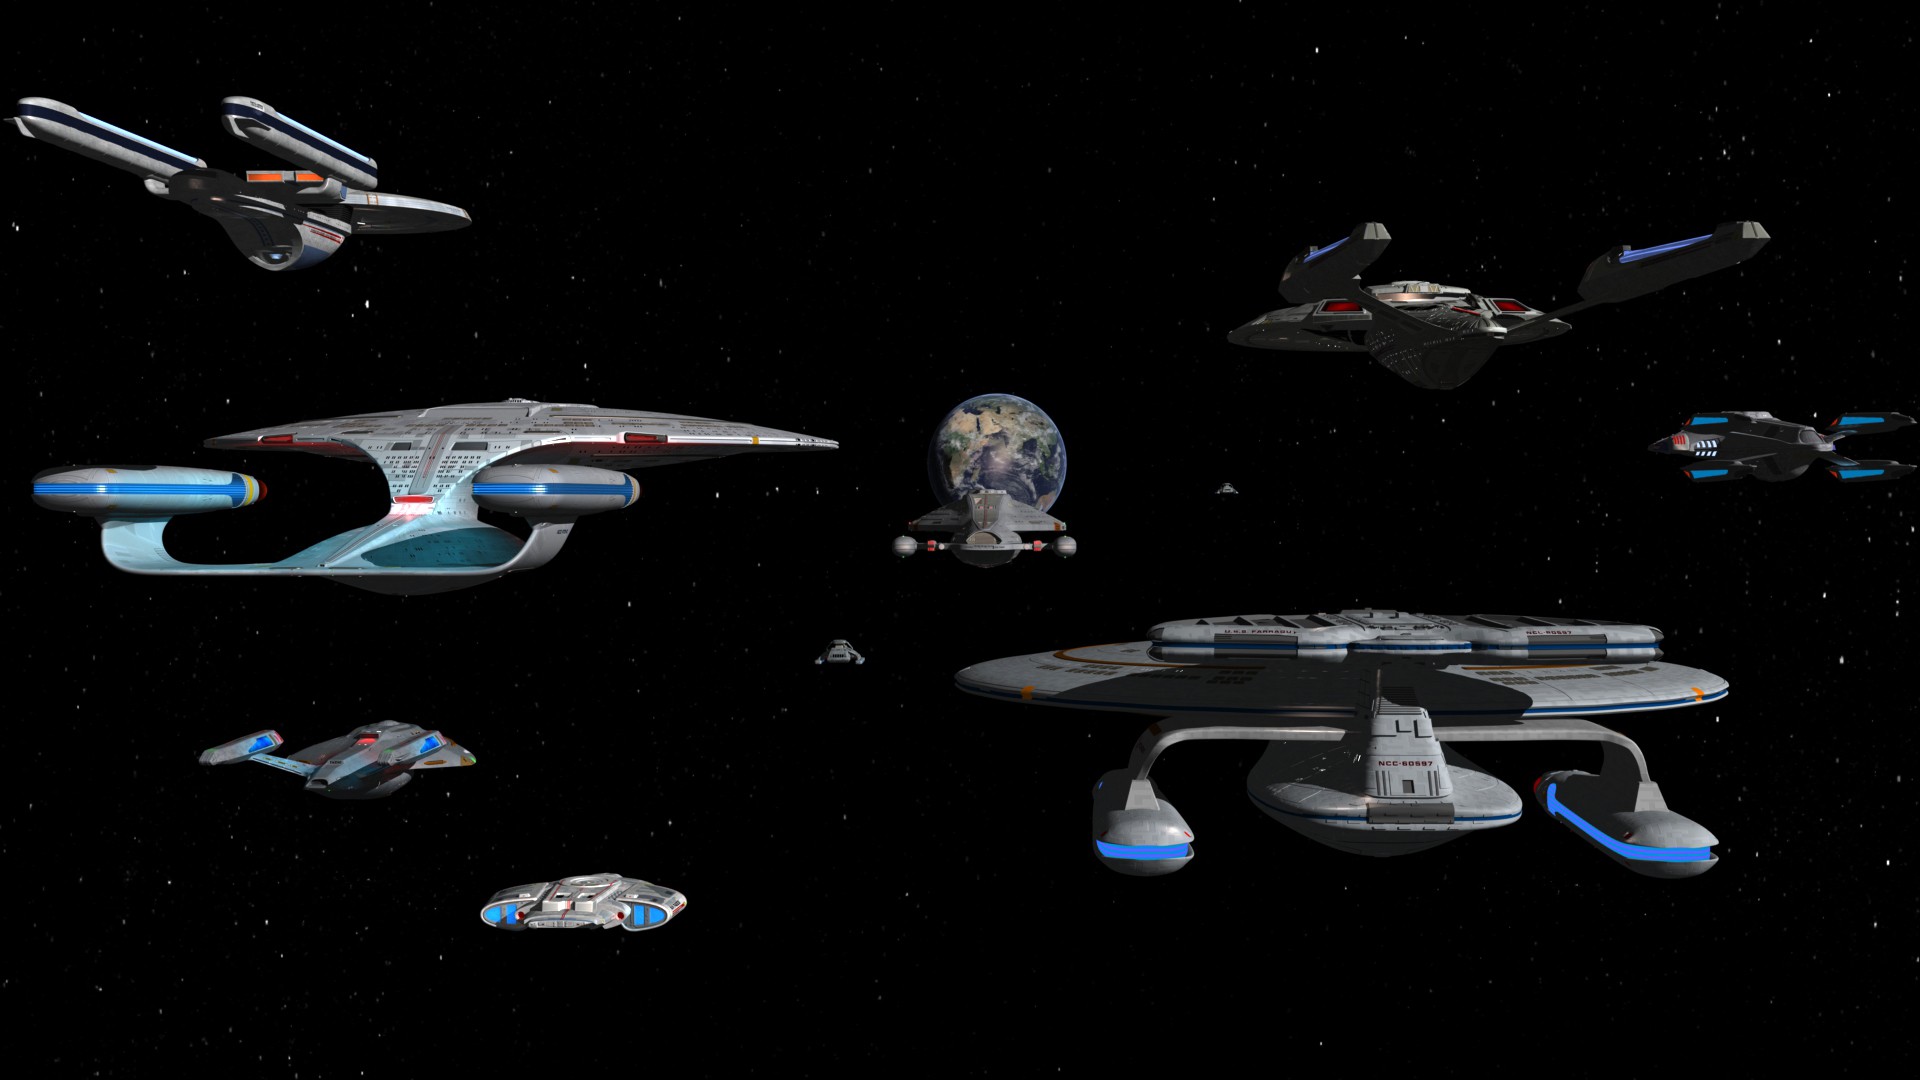 General 1920x1080 Star Trek spaceship space Earth Star Trek Voyager vehicle planet science fiction TV series Galaxy Class Cruiser Excelsior Class